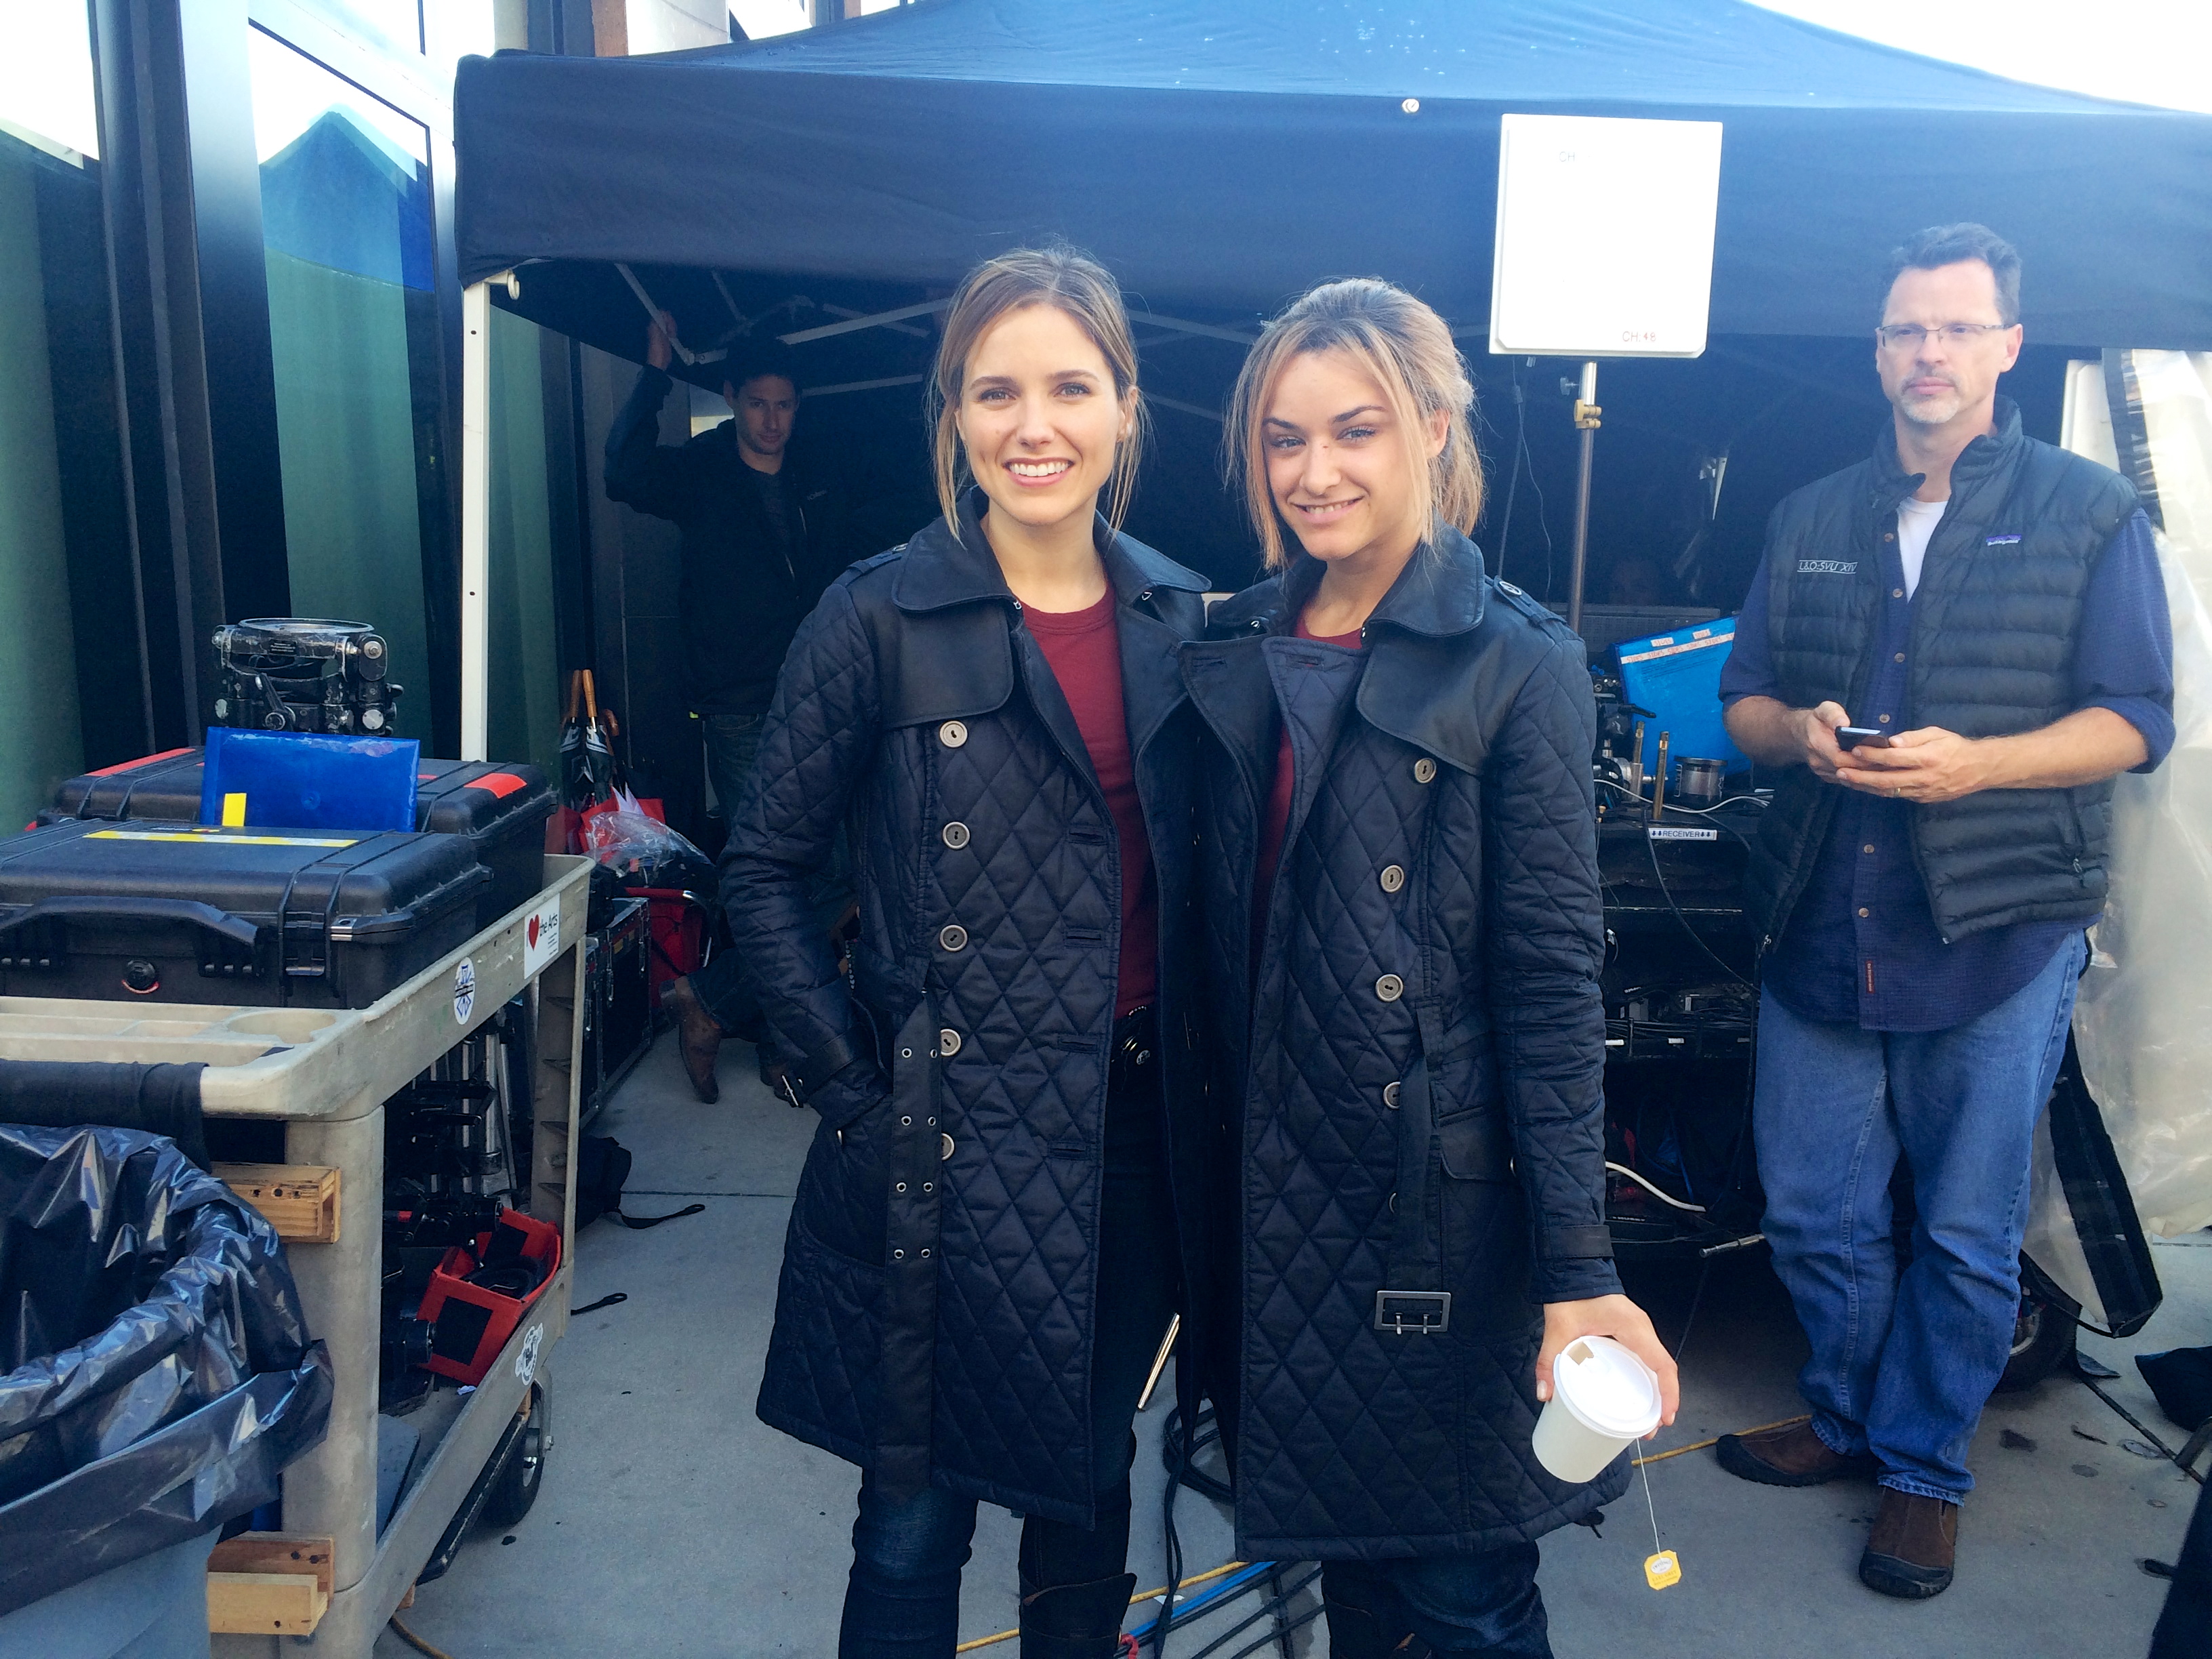 Law & Order SVU/Chicago PD Crossover Doubling Sophia Bush